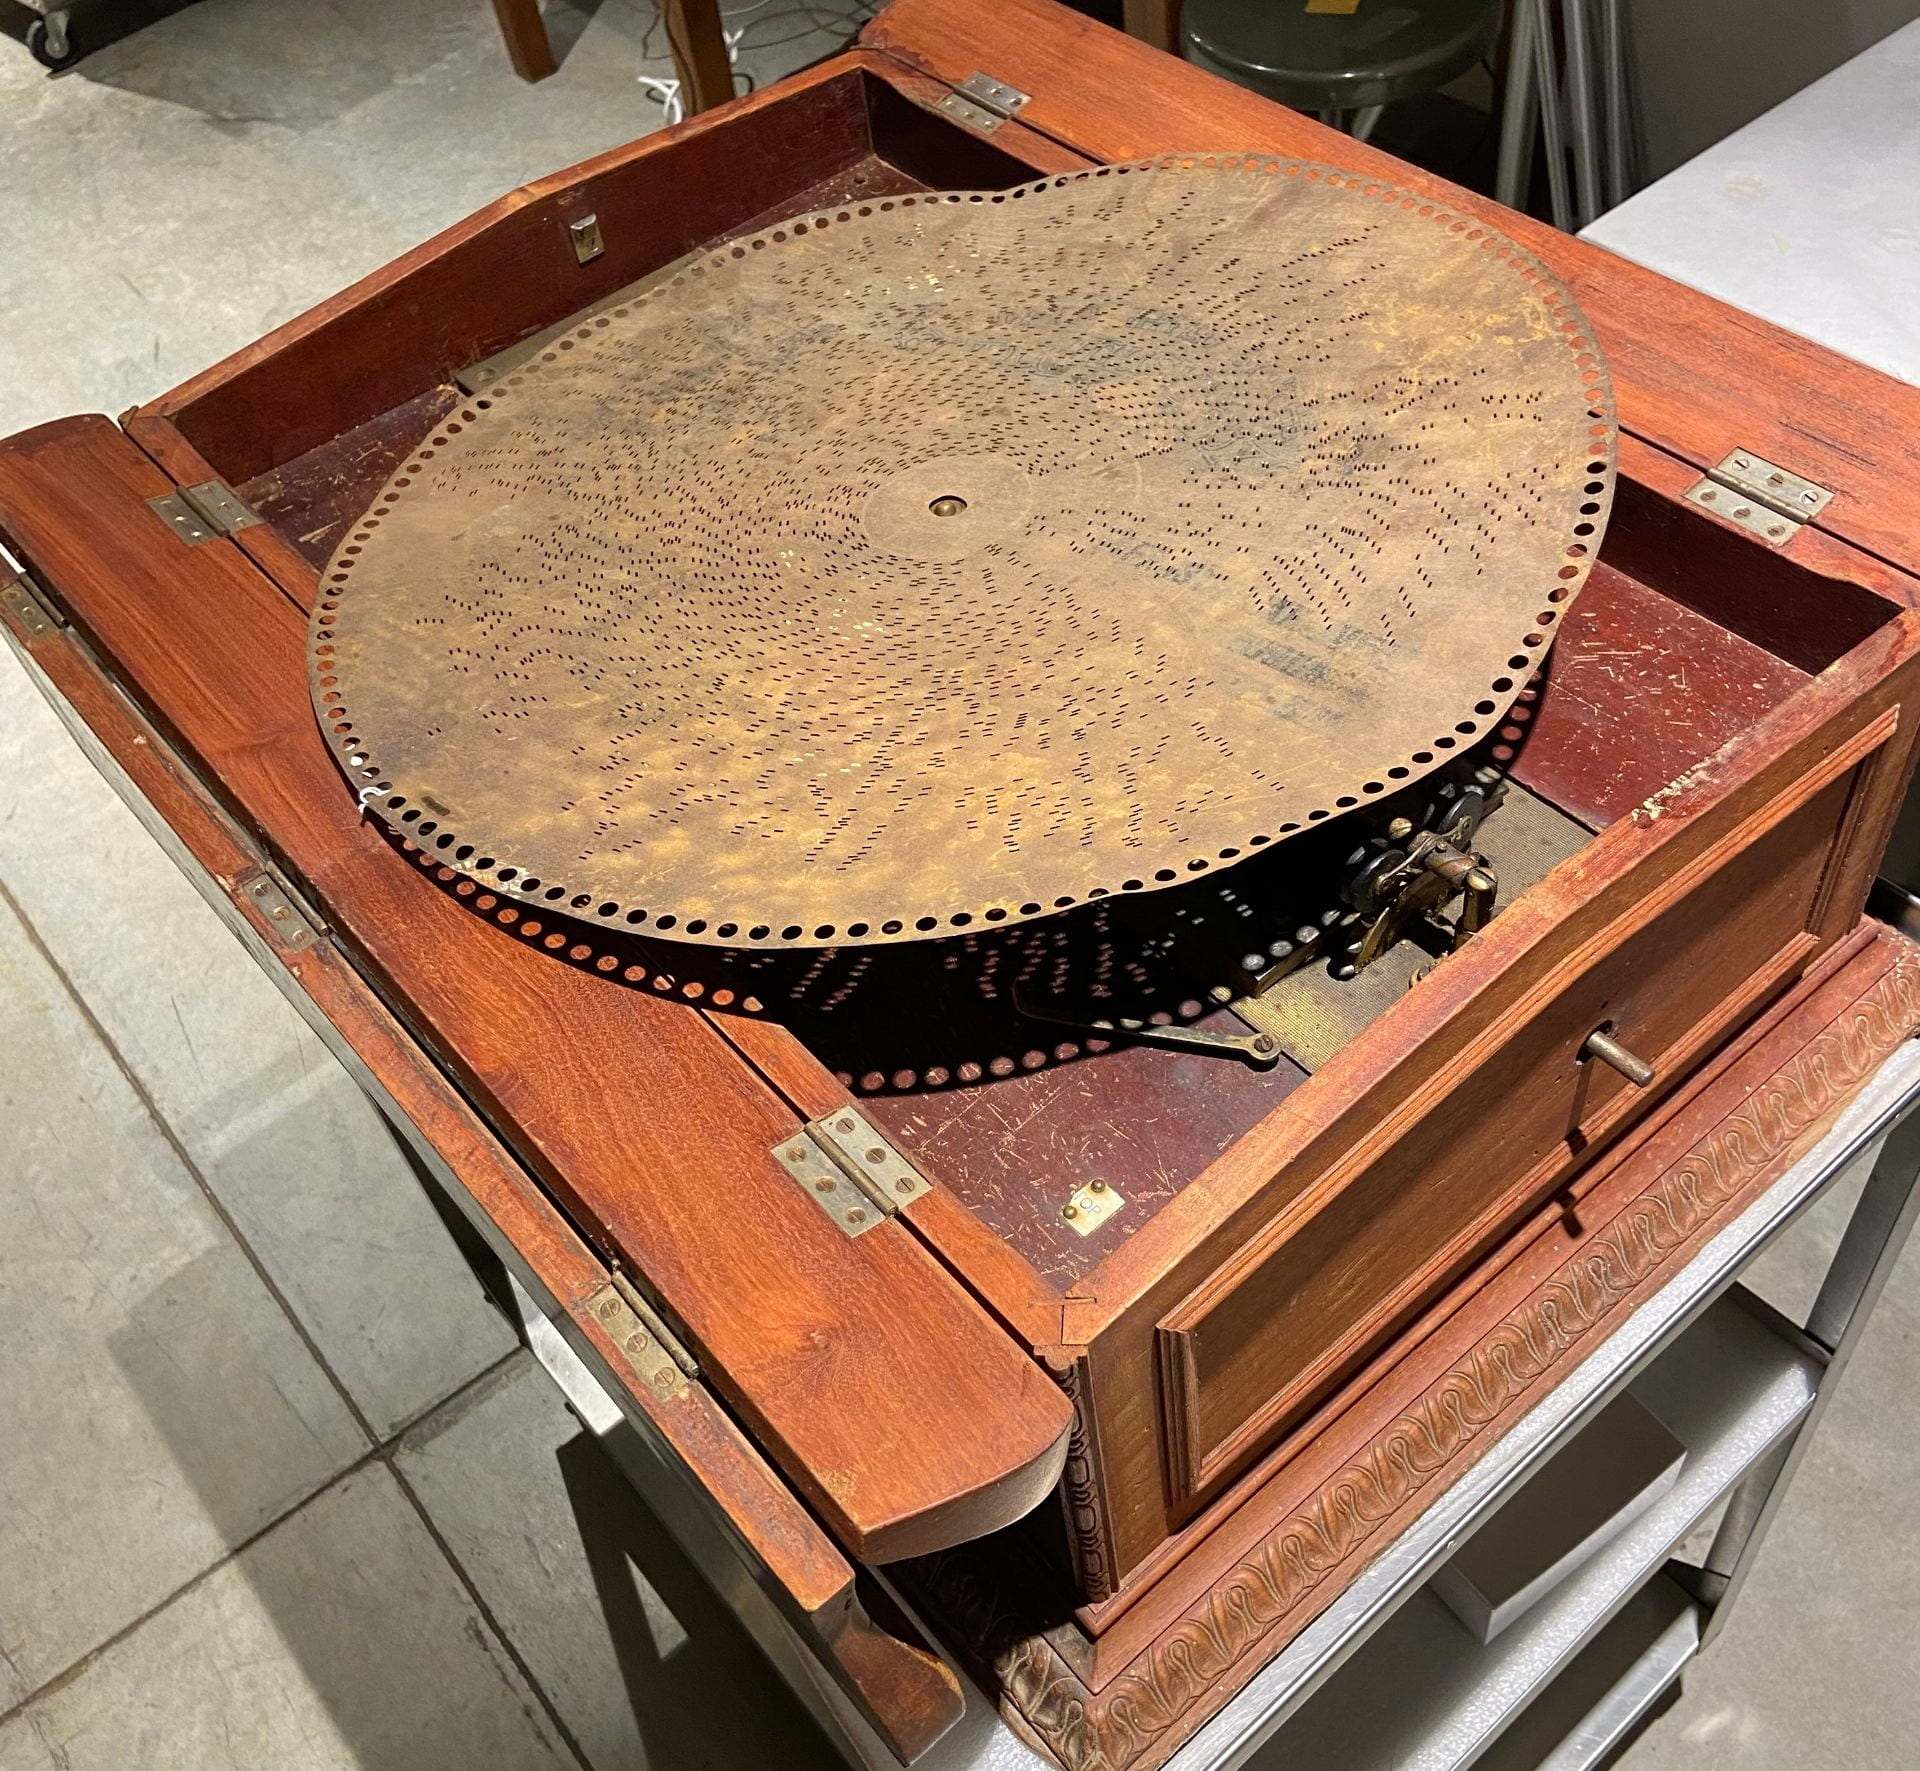 A wooden box on a metal cart. The top of the box has a lid that hinges open on two sides. It is wide open showing the interior. The interior has a large metal disk laying on top. There is a small hole in the middle where a pin from the wooden box shows through.